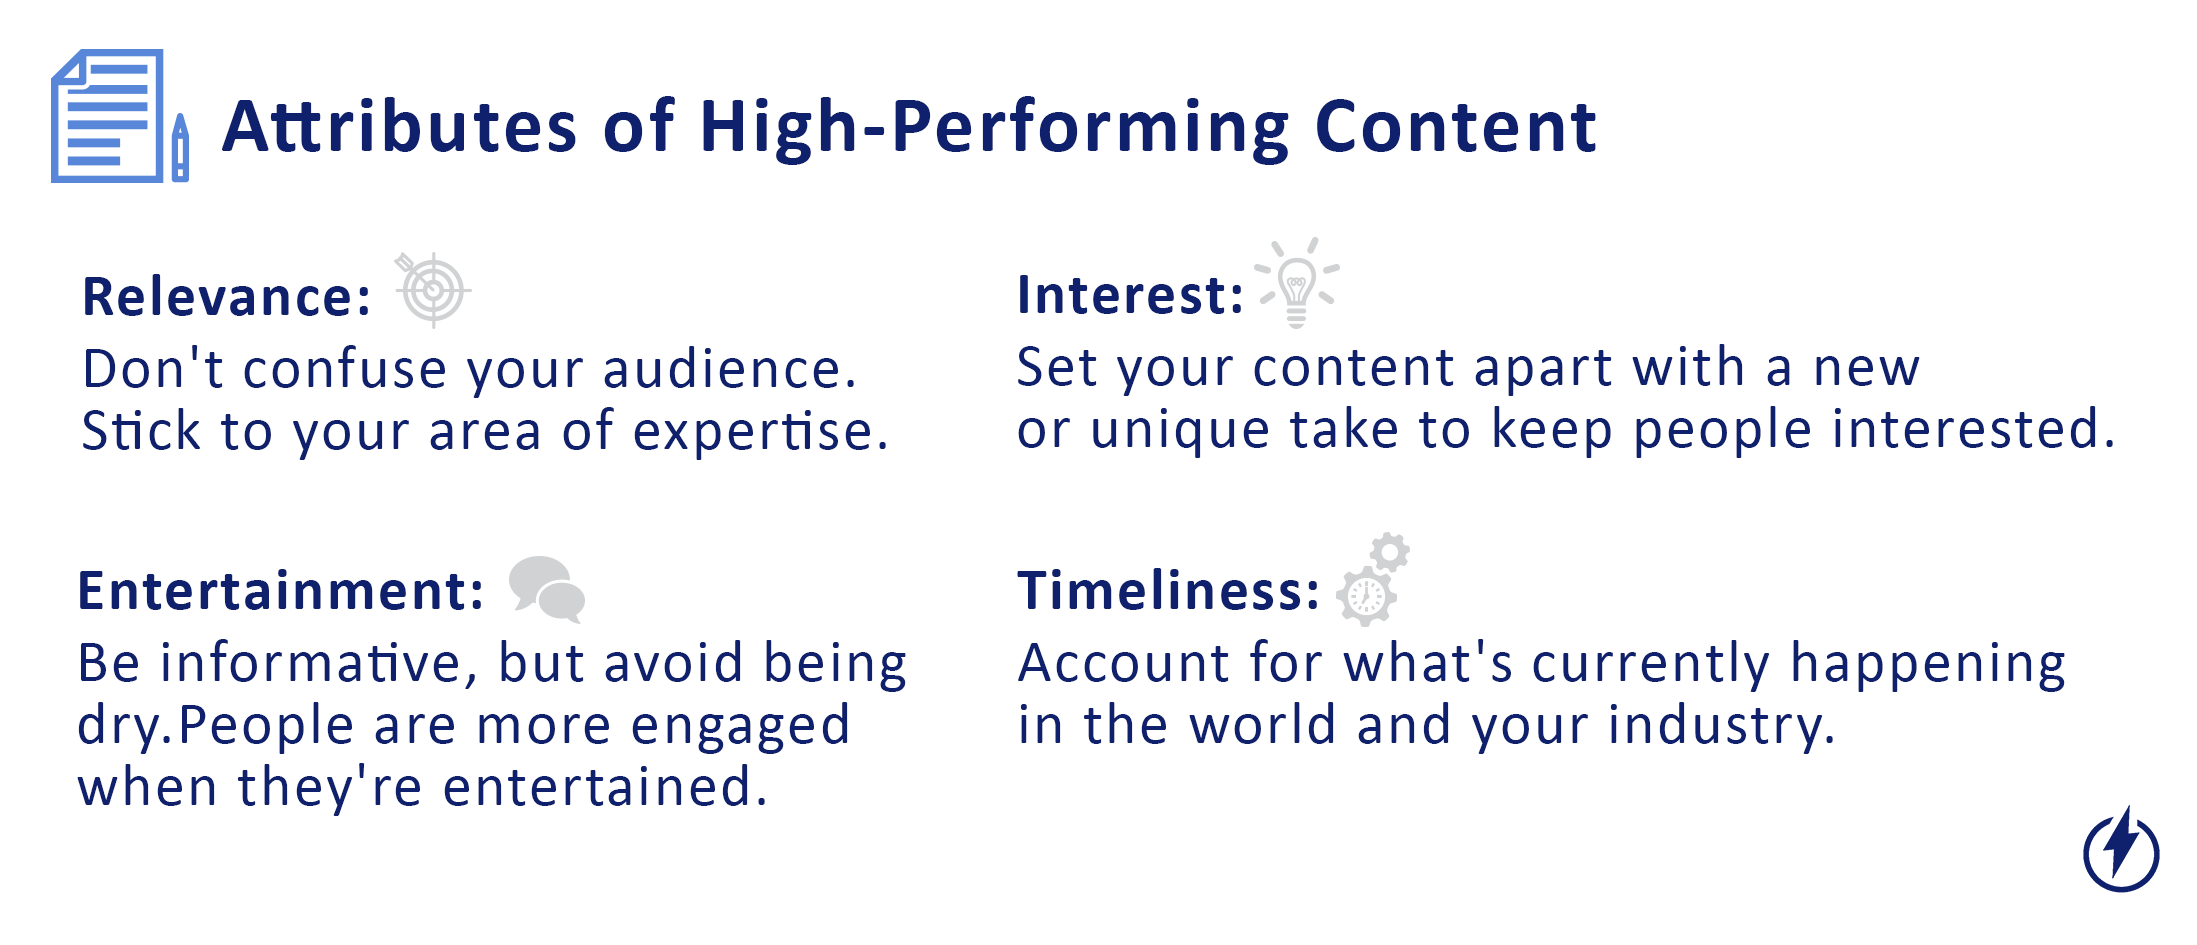 Attributes of High-Performing Content Image